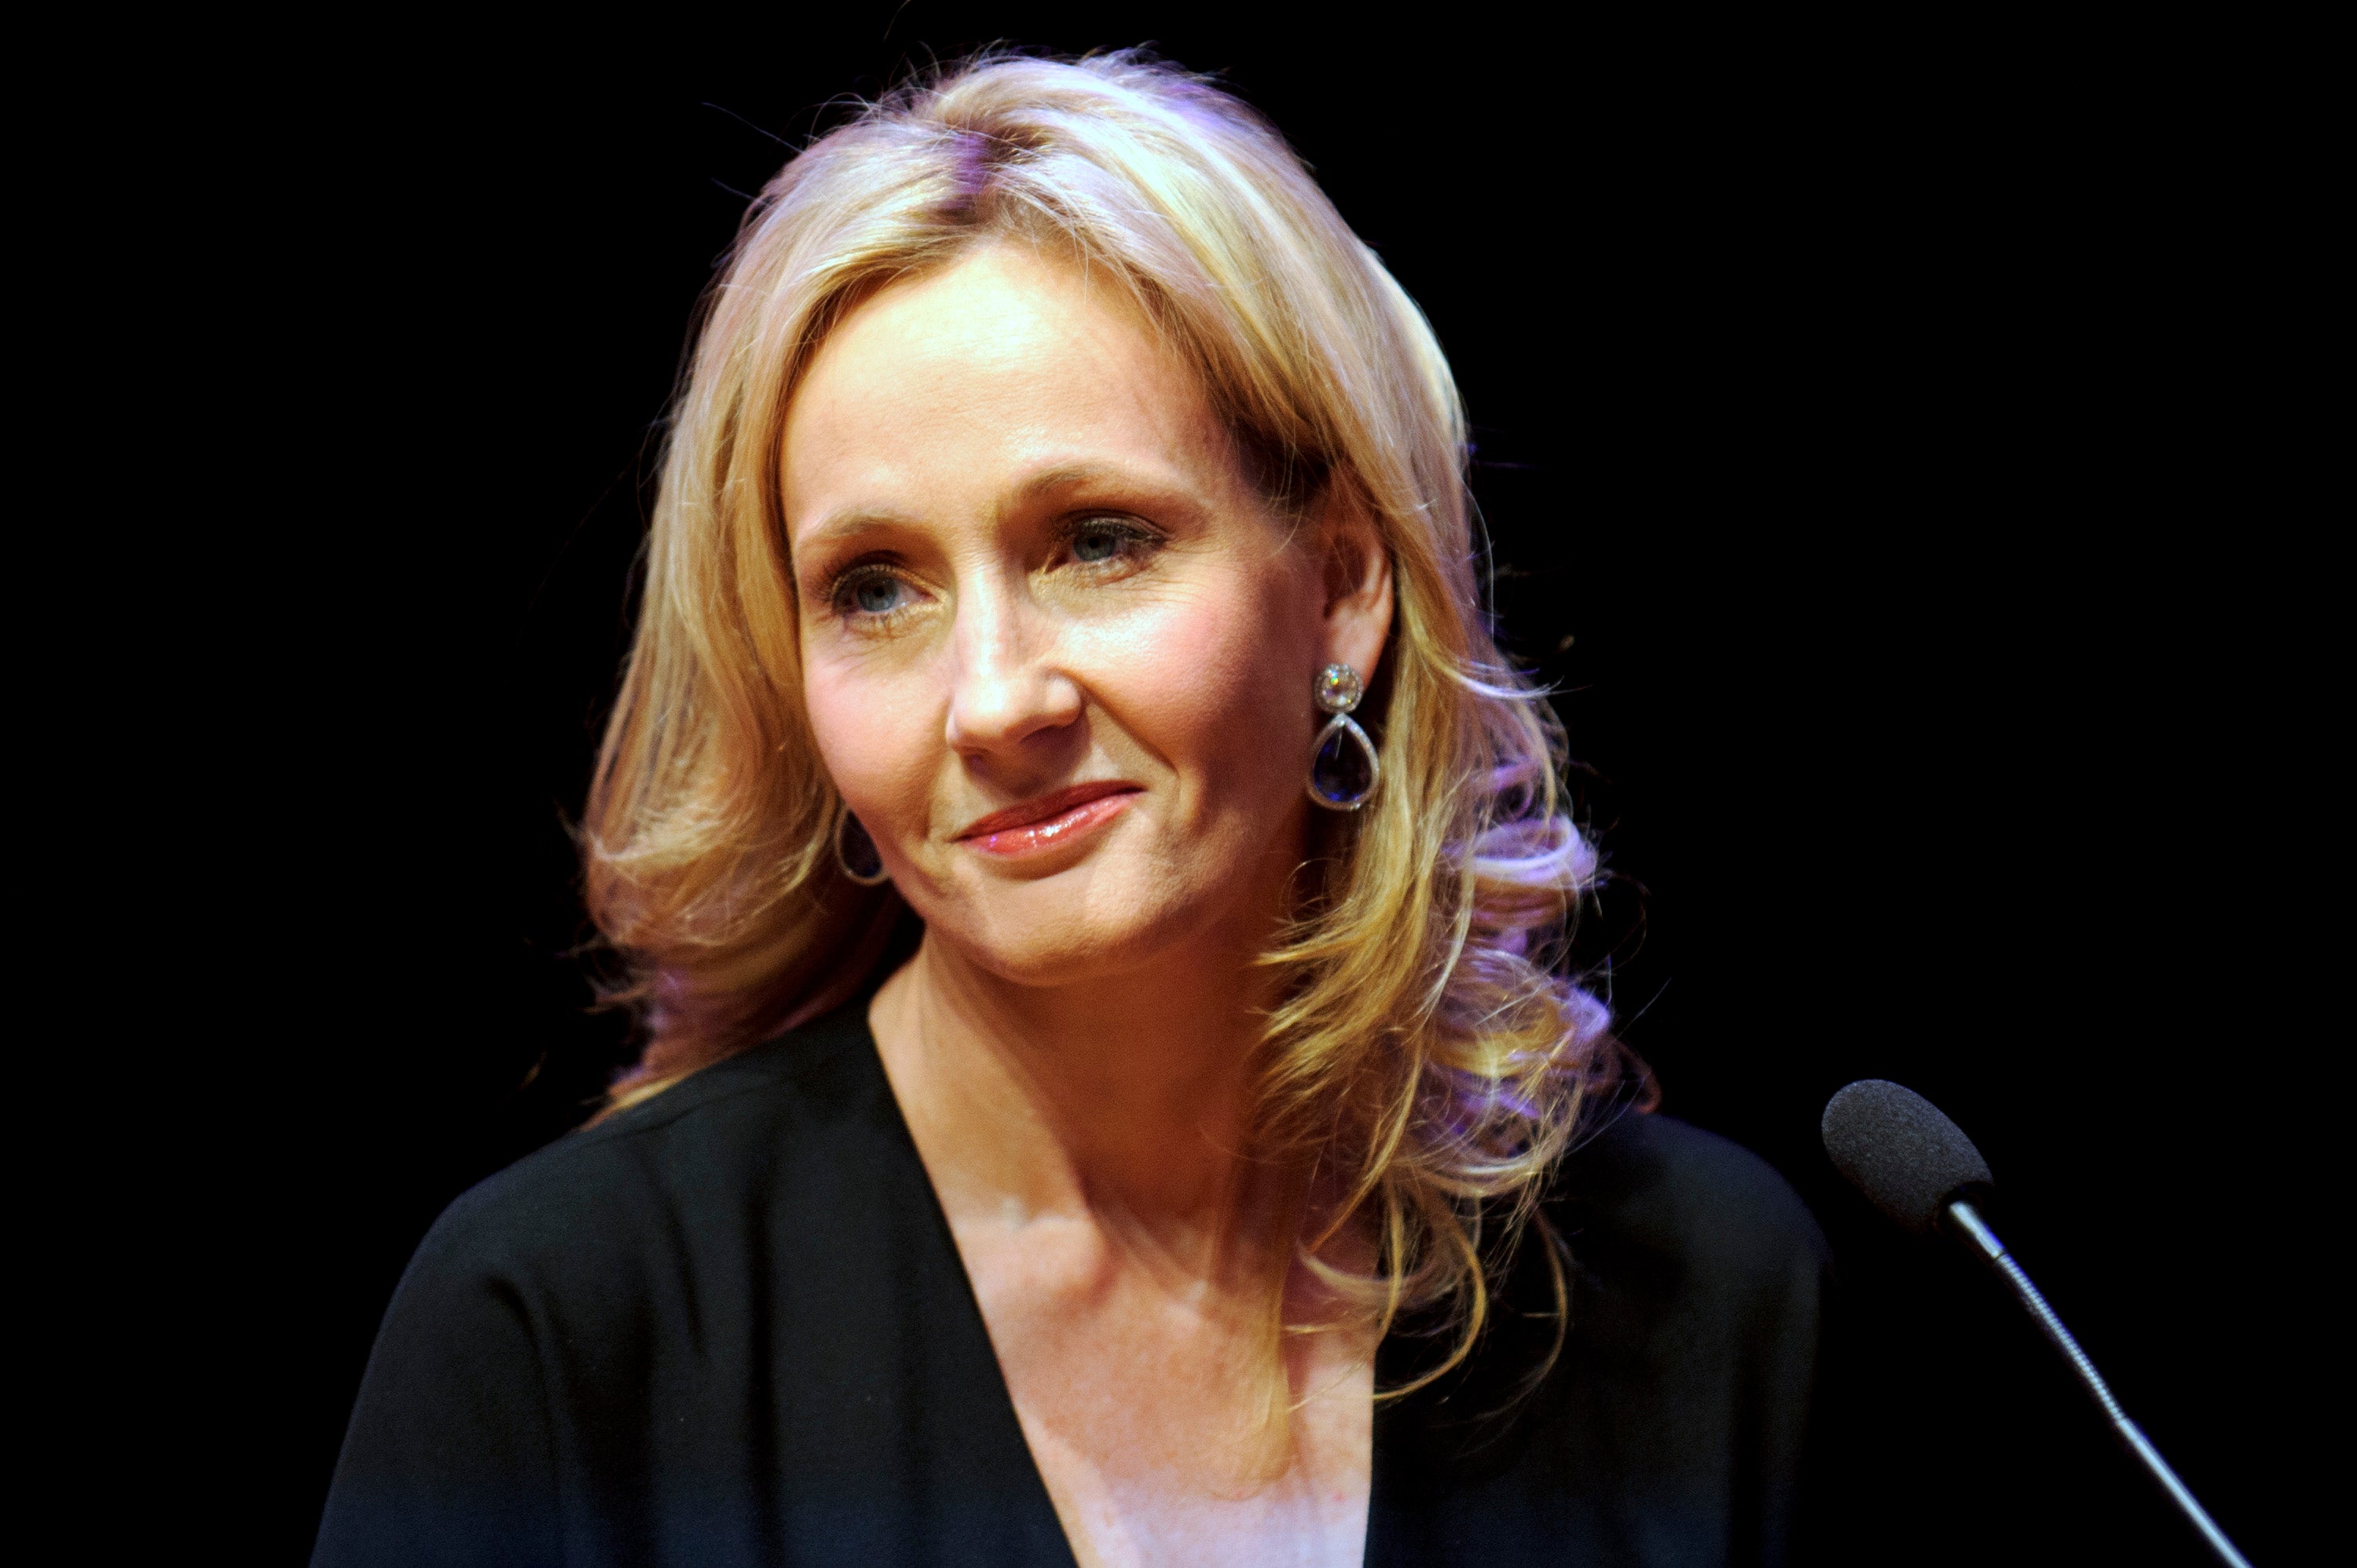 JK Rowling rose to fame and fortune with the Harry Potter books